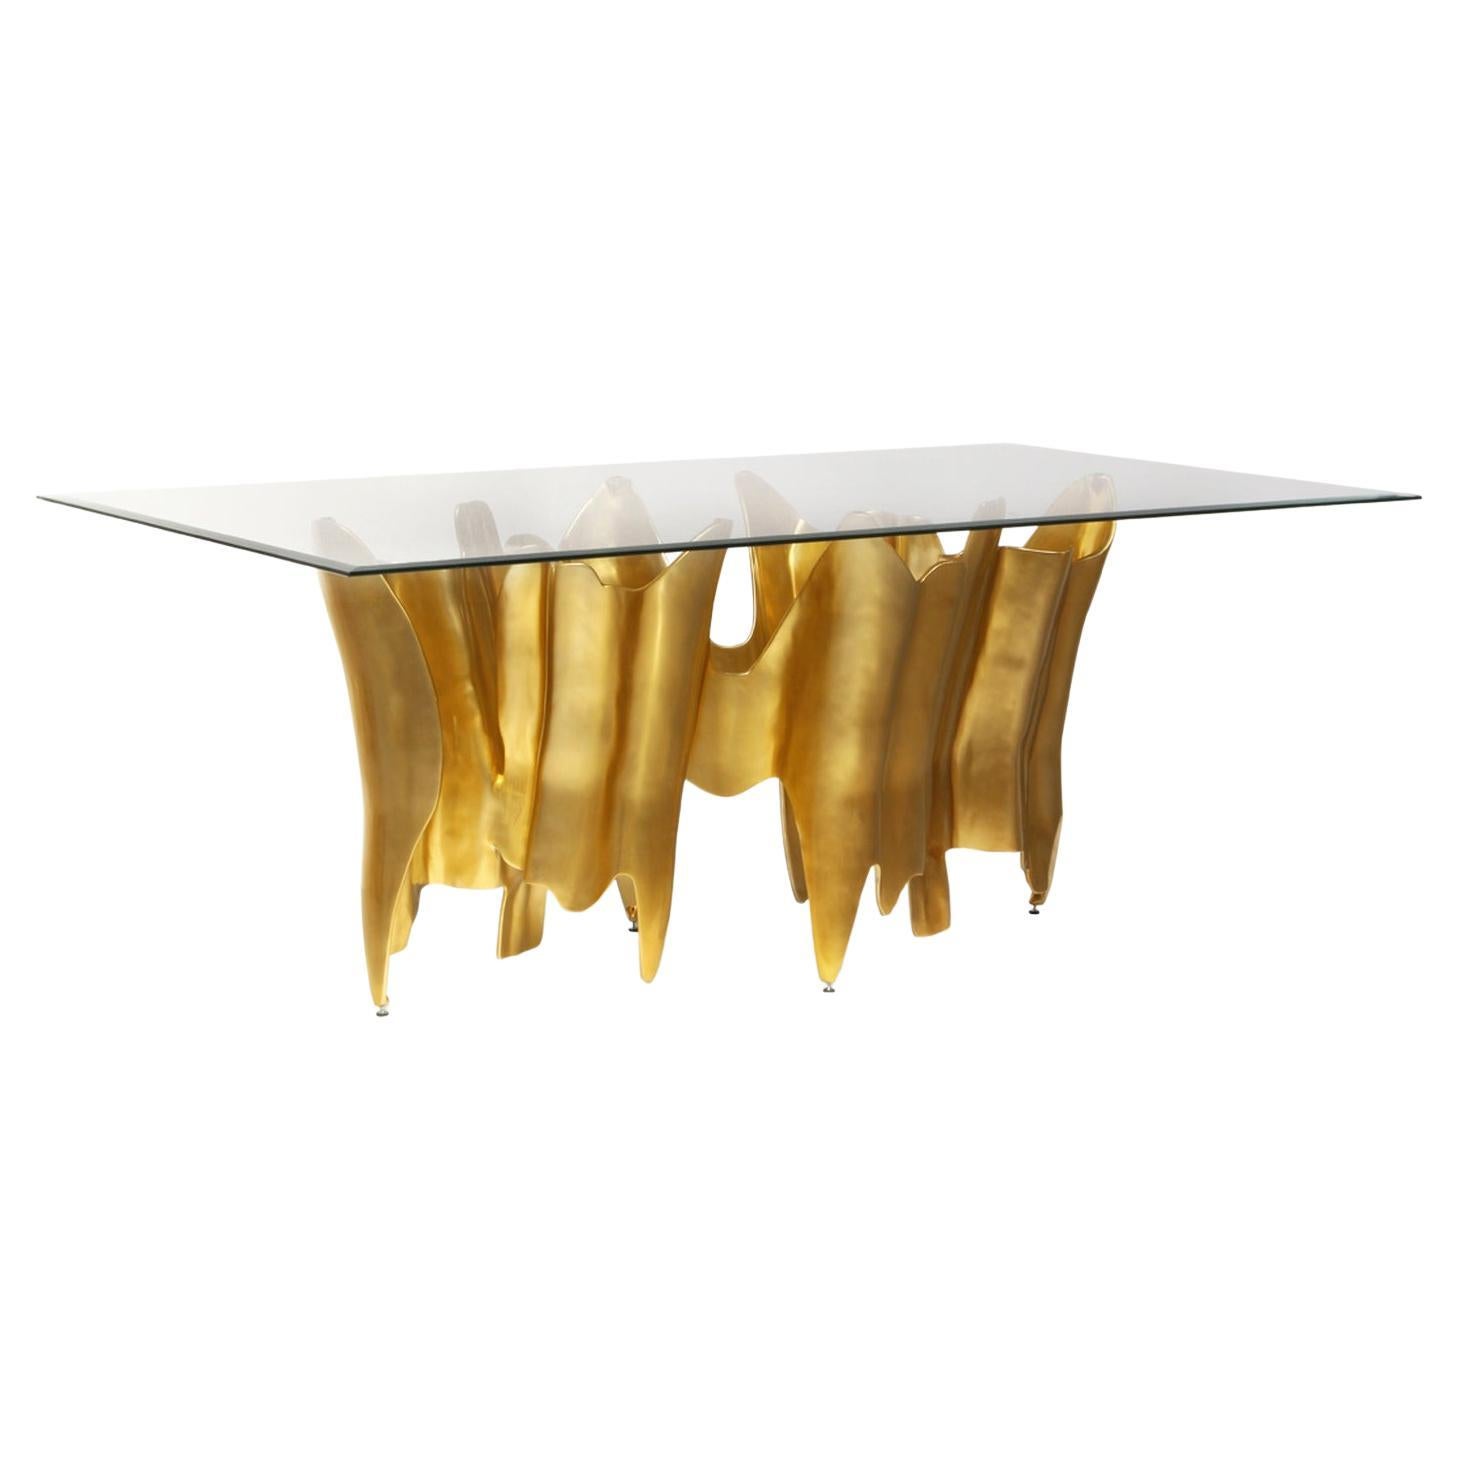 Big Dinning Table Design "Vague" in Metal and Glass For Sale